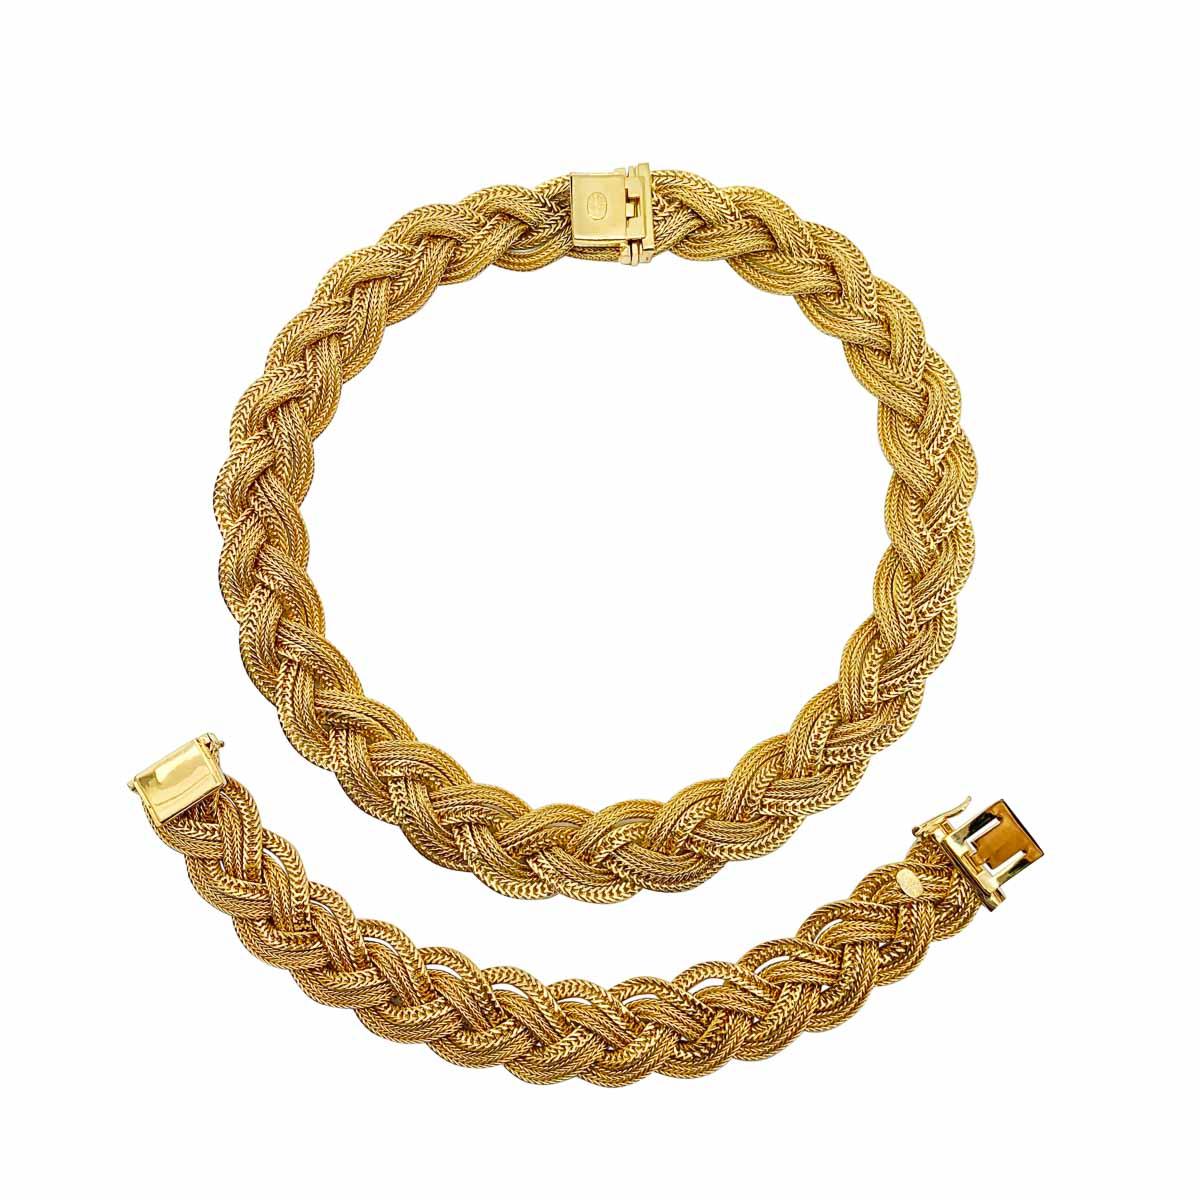 Vintage Christian Dior by Marc Bohan Plaited Collar & Cuff 1965 In Good Condition For Sale In Wilmslow, GB